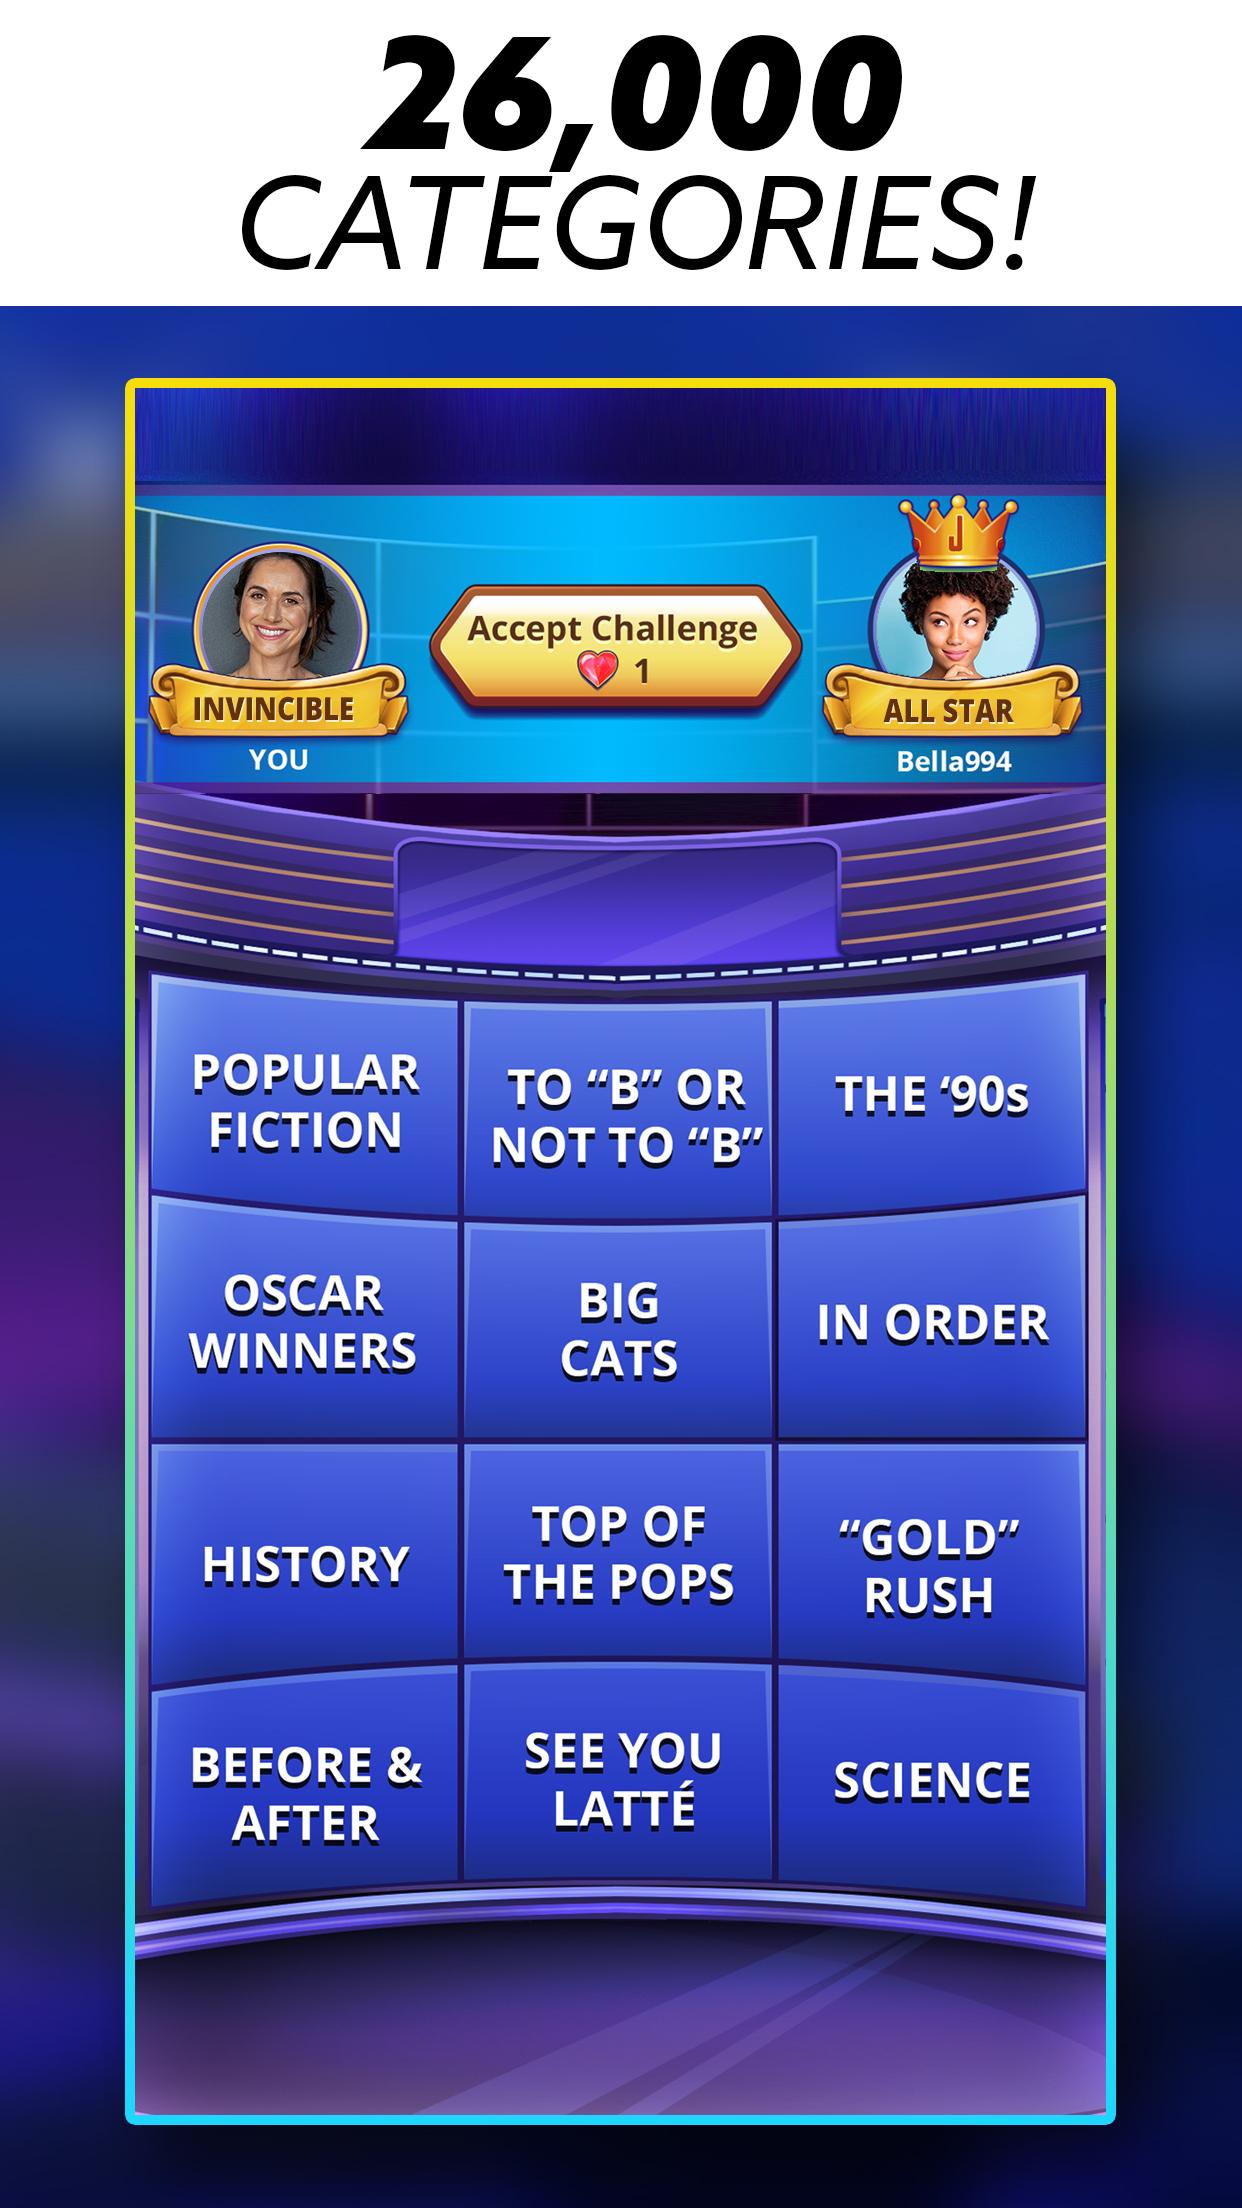 jeopardy computer game download